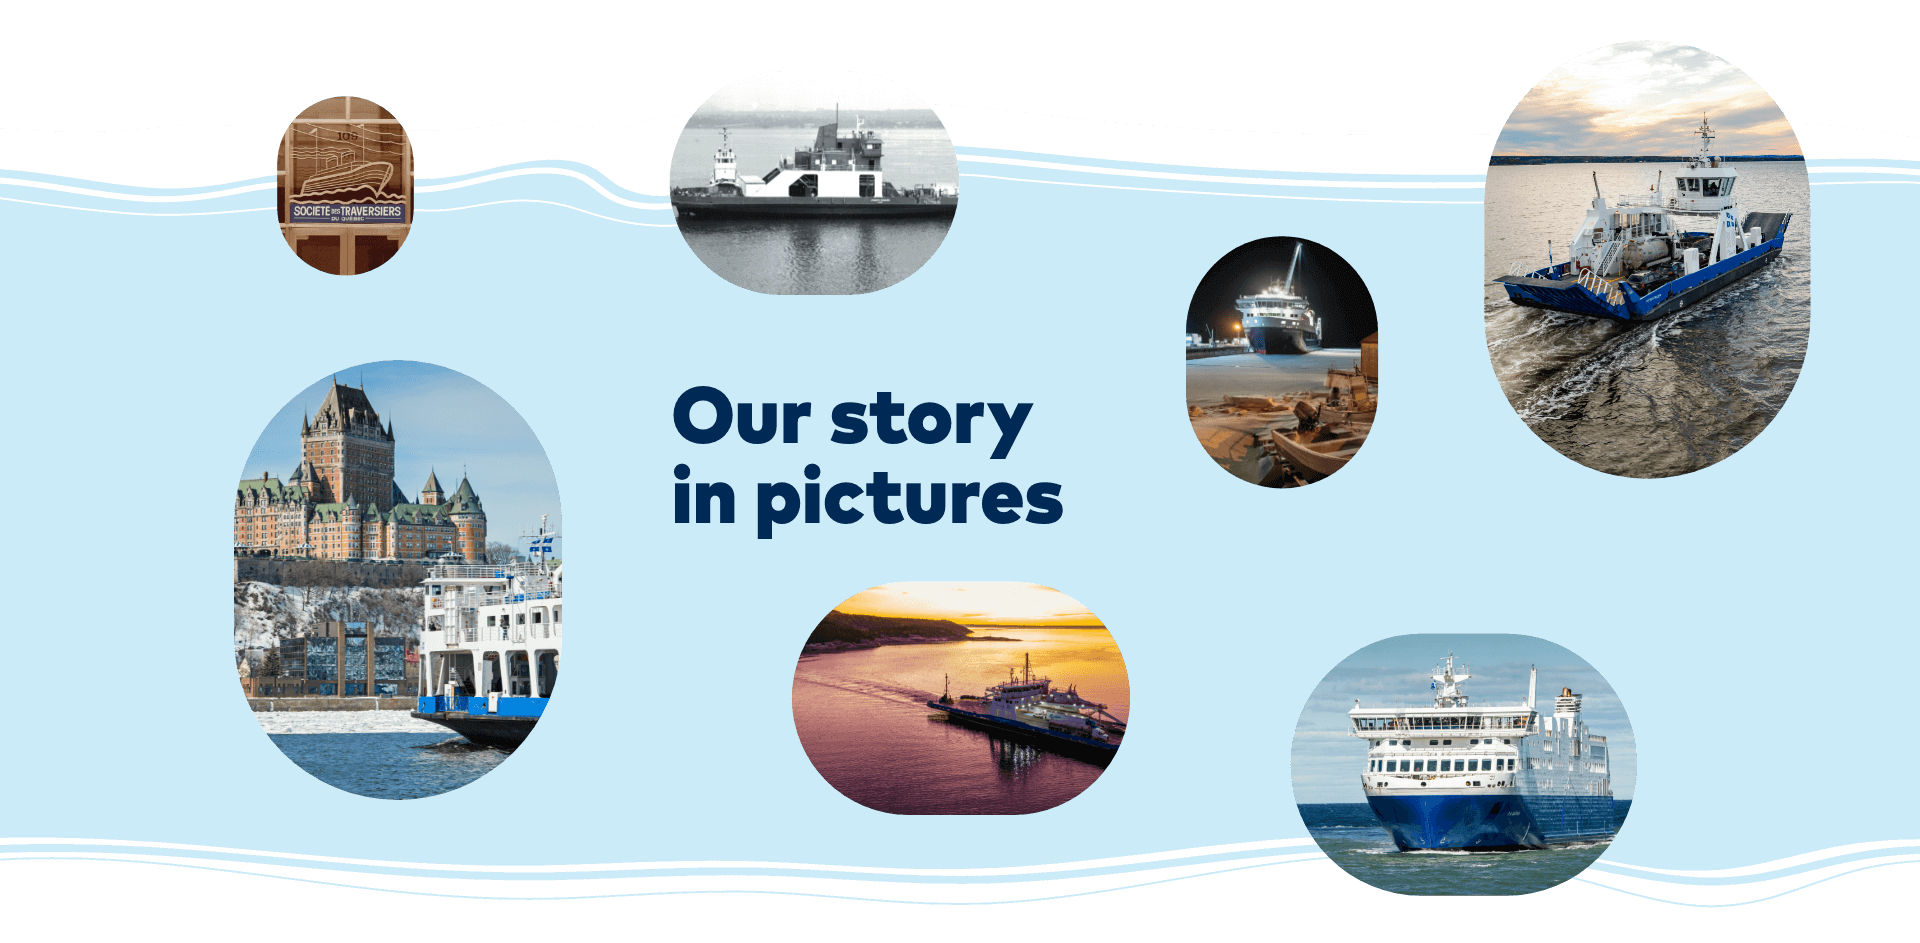 Our story in pictures